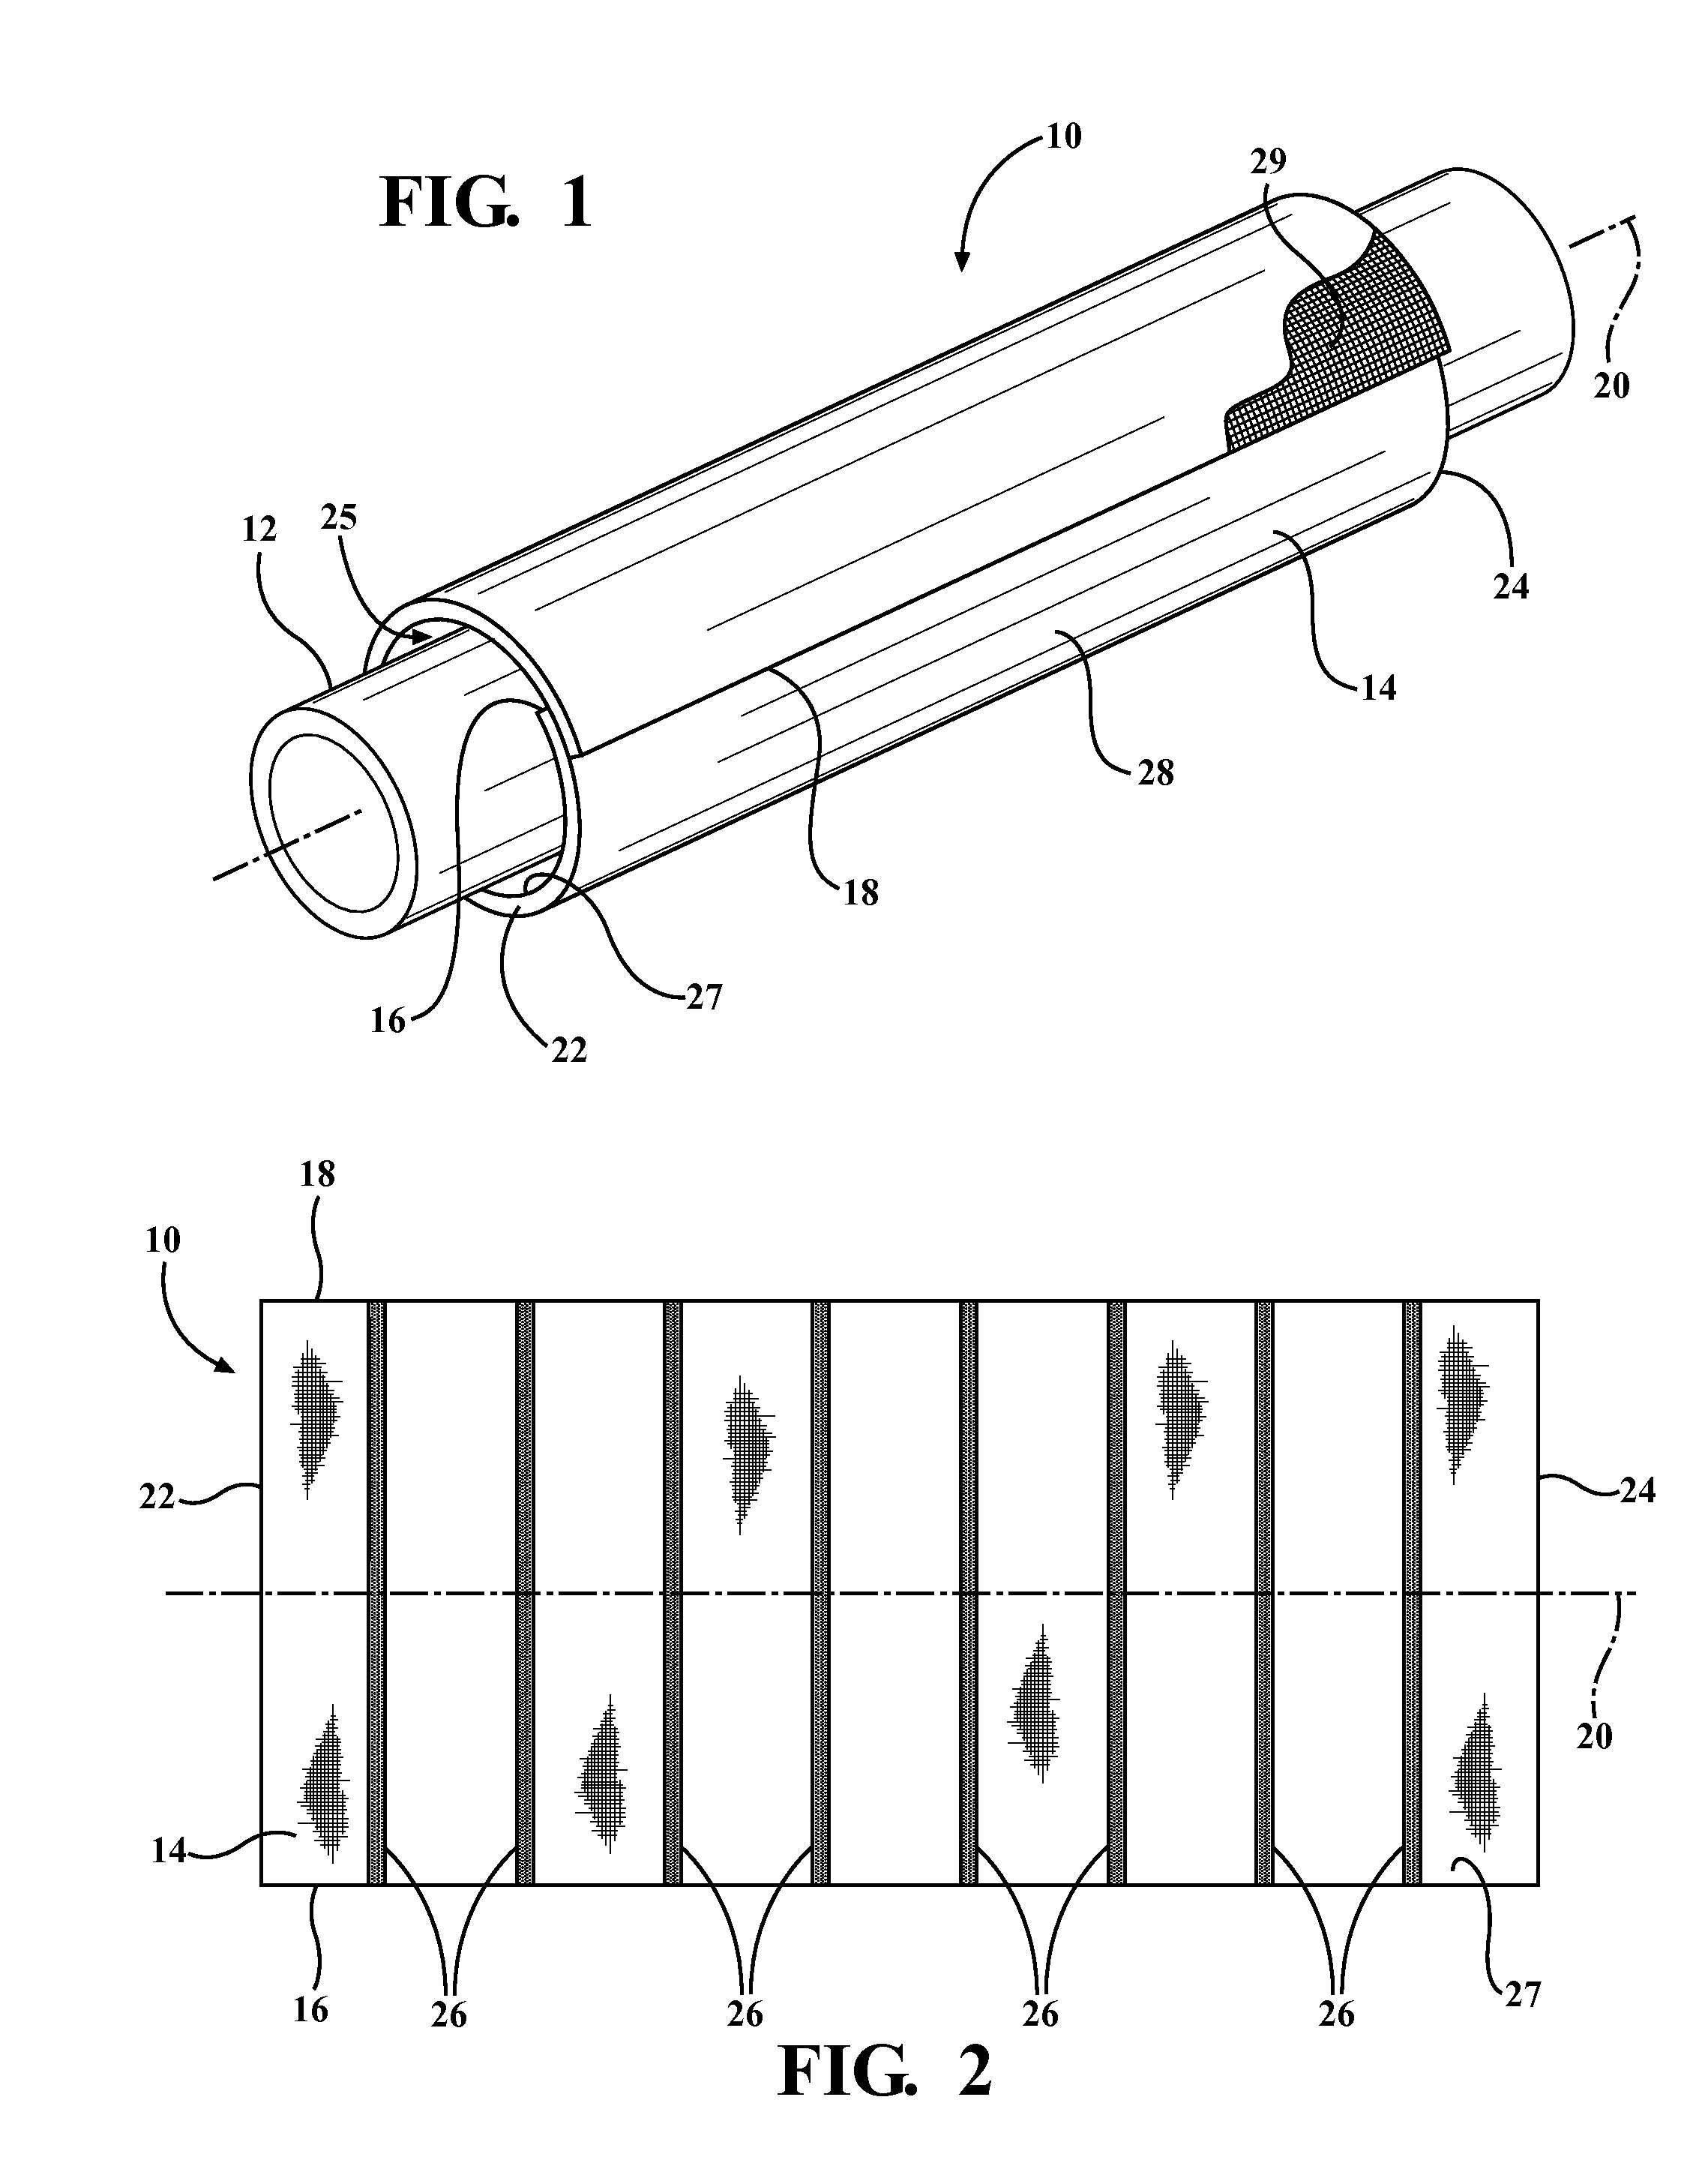 Reinforced Wrappable Protective Textile Sleeve and Method of Construction Thereof